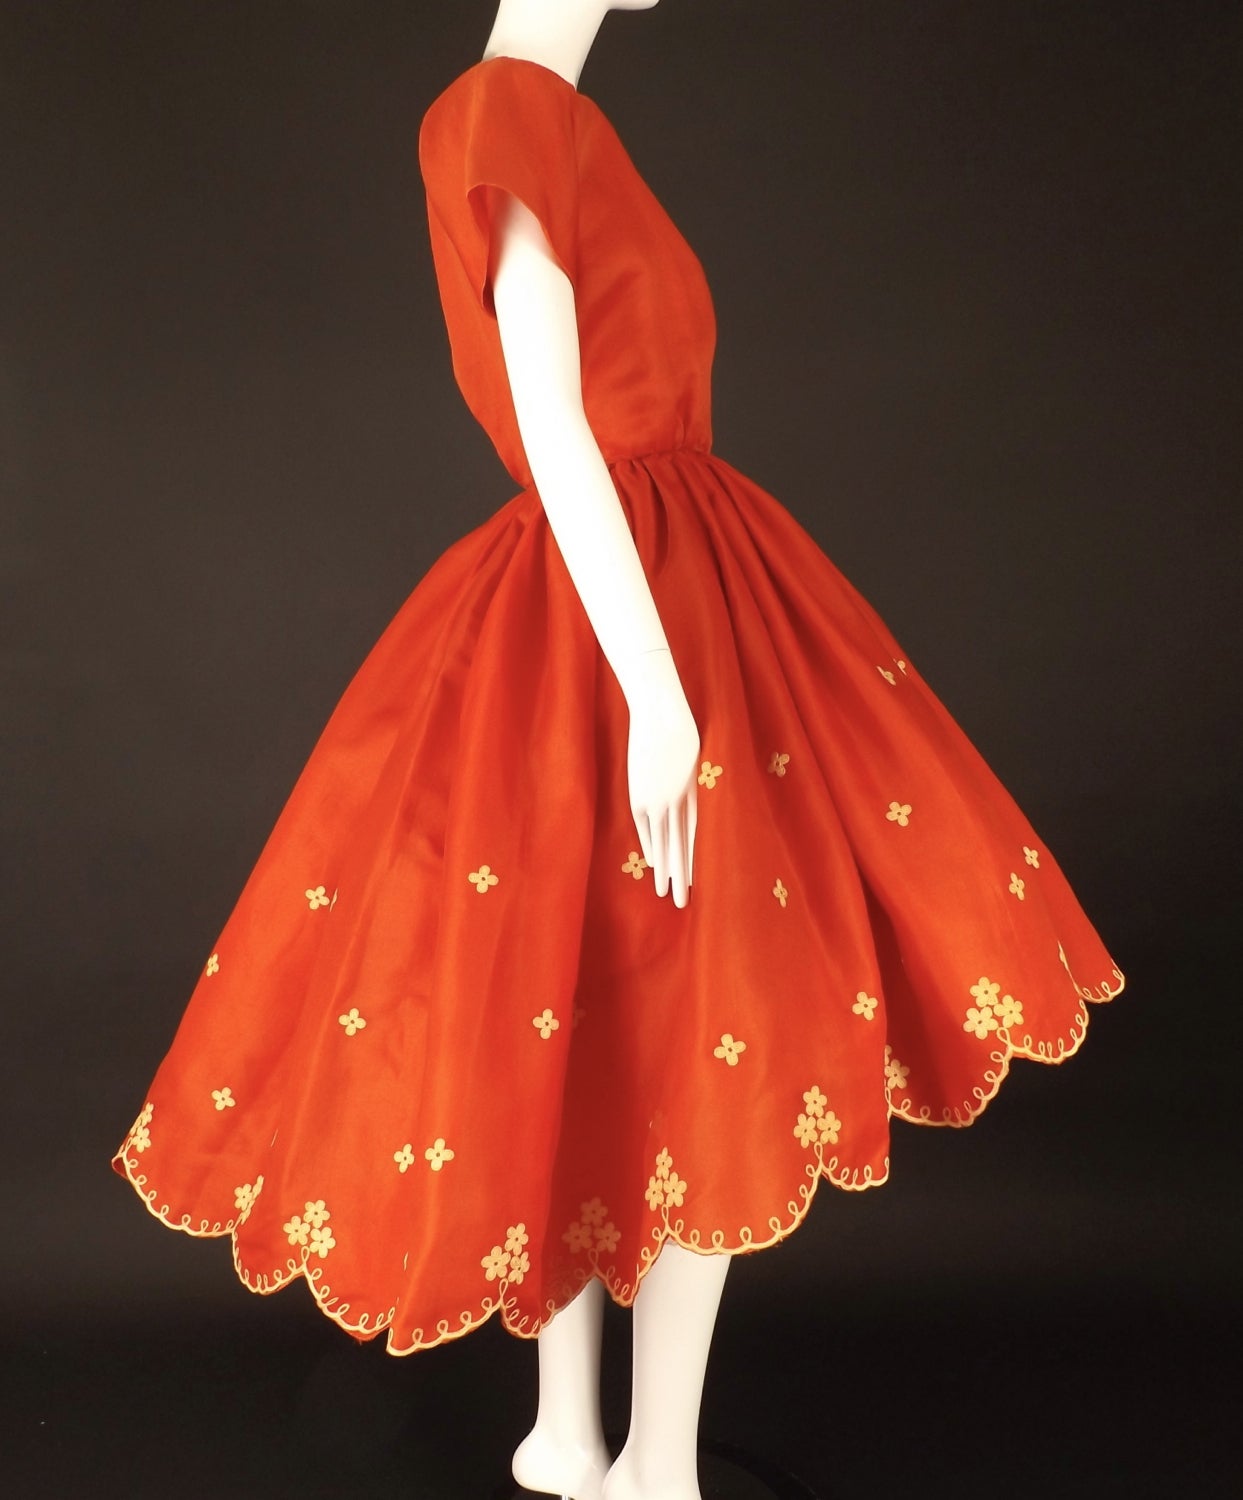 Gorgeous early 1960s party dress in a red silk gazar.  The bodice has a wide, scoop neckline with a blouson at the waist. No darting at the bust. Short sleeves are cut in one with the bodice. The back is slit down to the waist and has a single